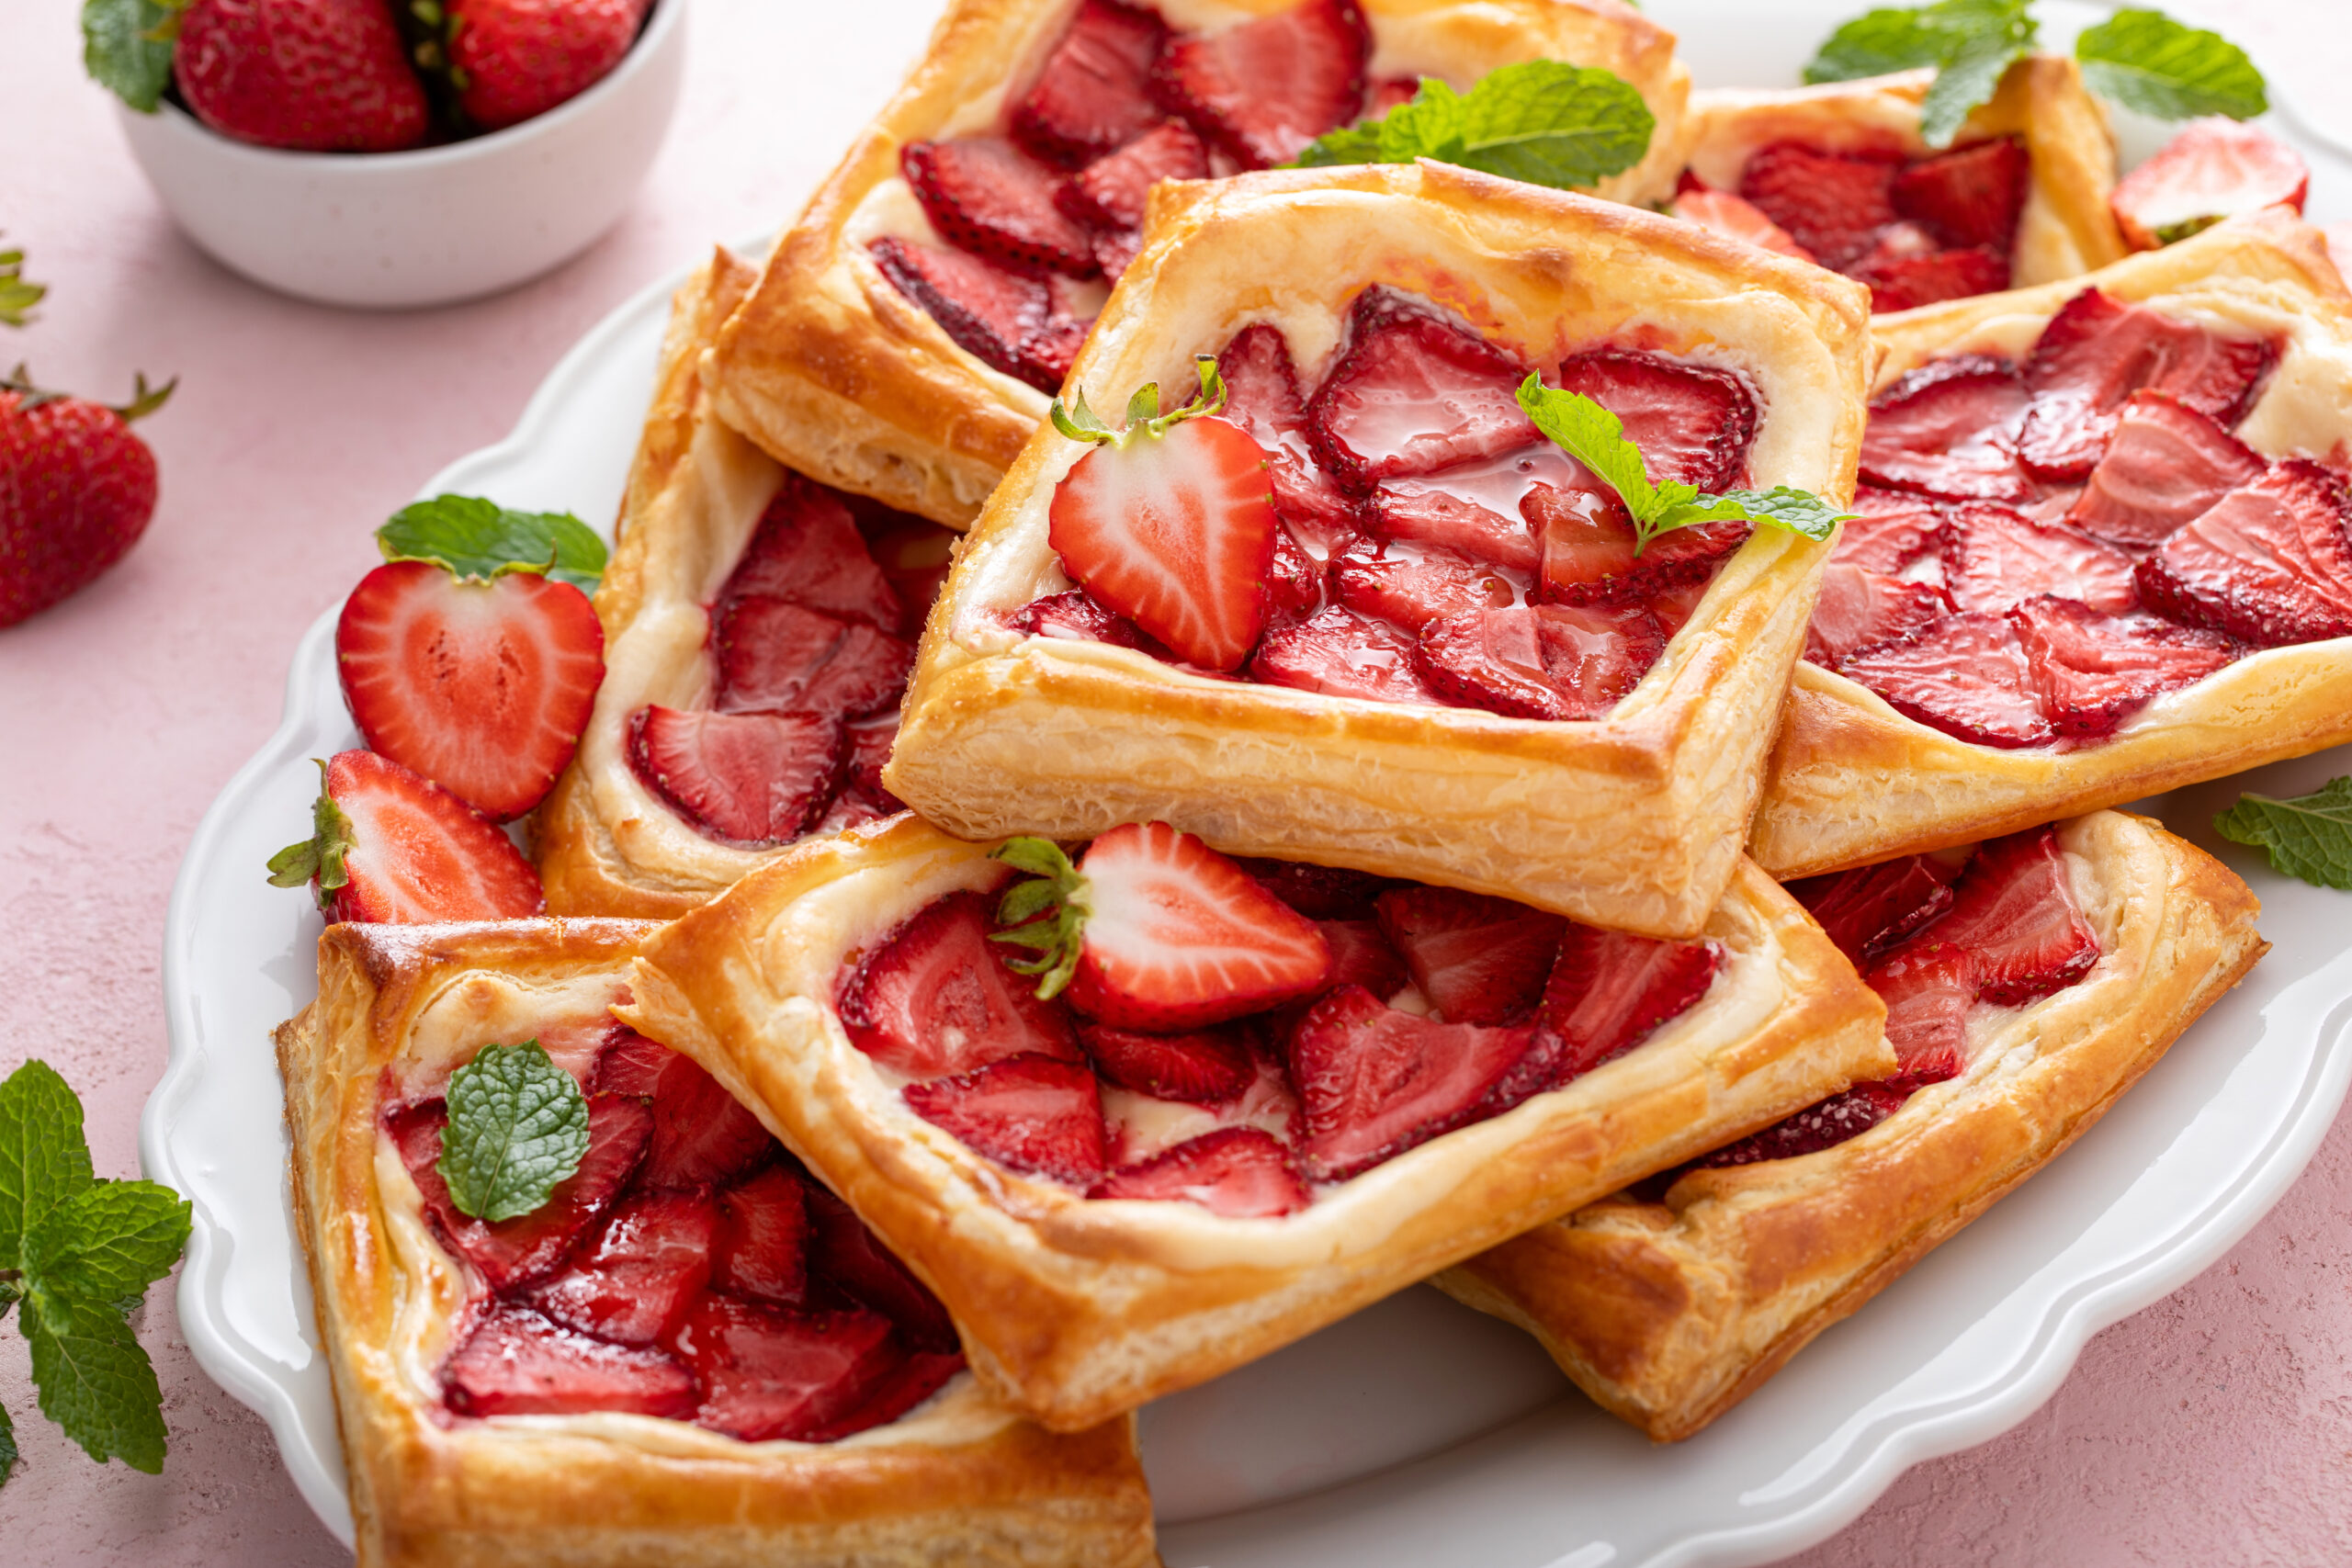 Hands down the perfectly easy yet delicious baked Strawberry Danish! Topped with a delicious  cream cheese filling and fresh strawberries this danish is sure to be a hit!